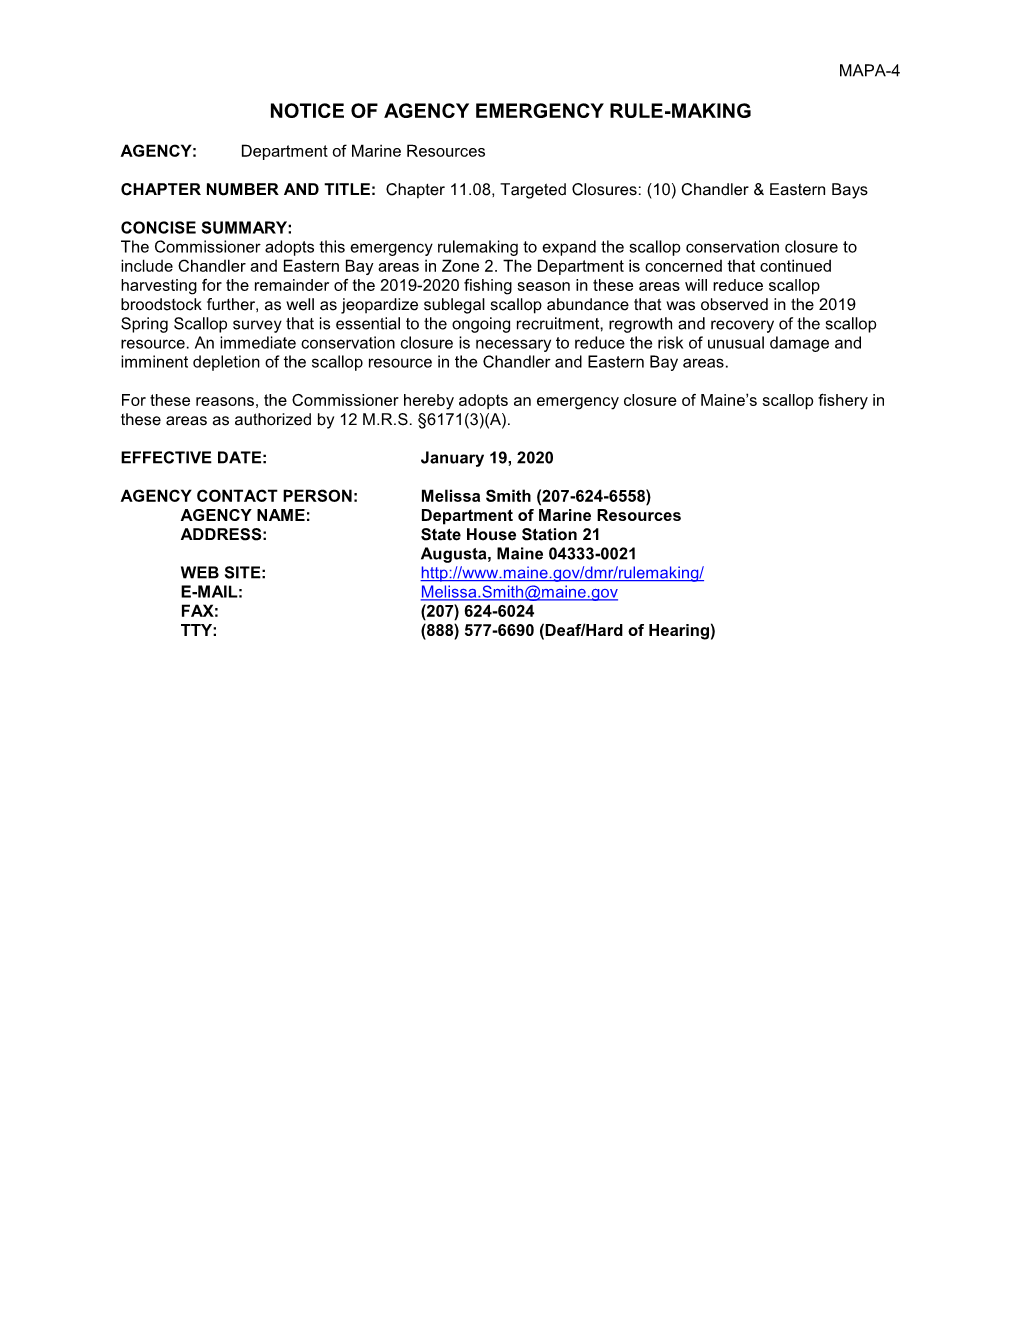 Notice of Emergency Rulemaking